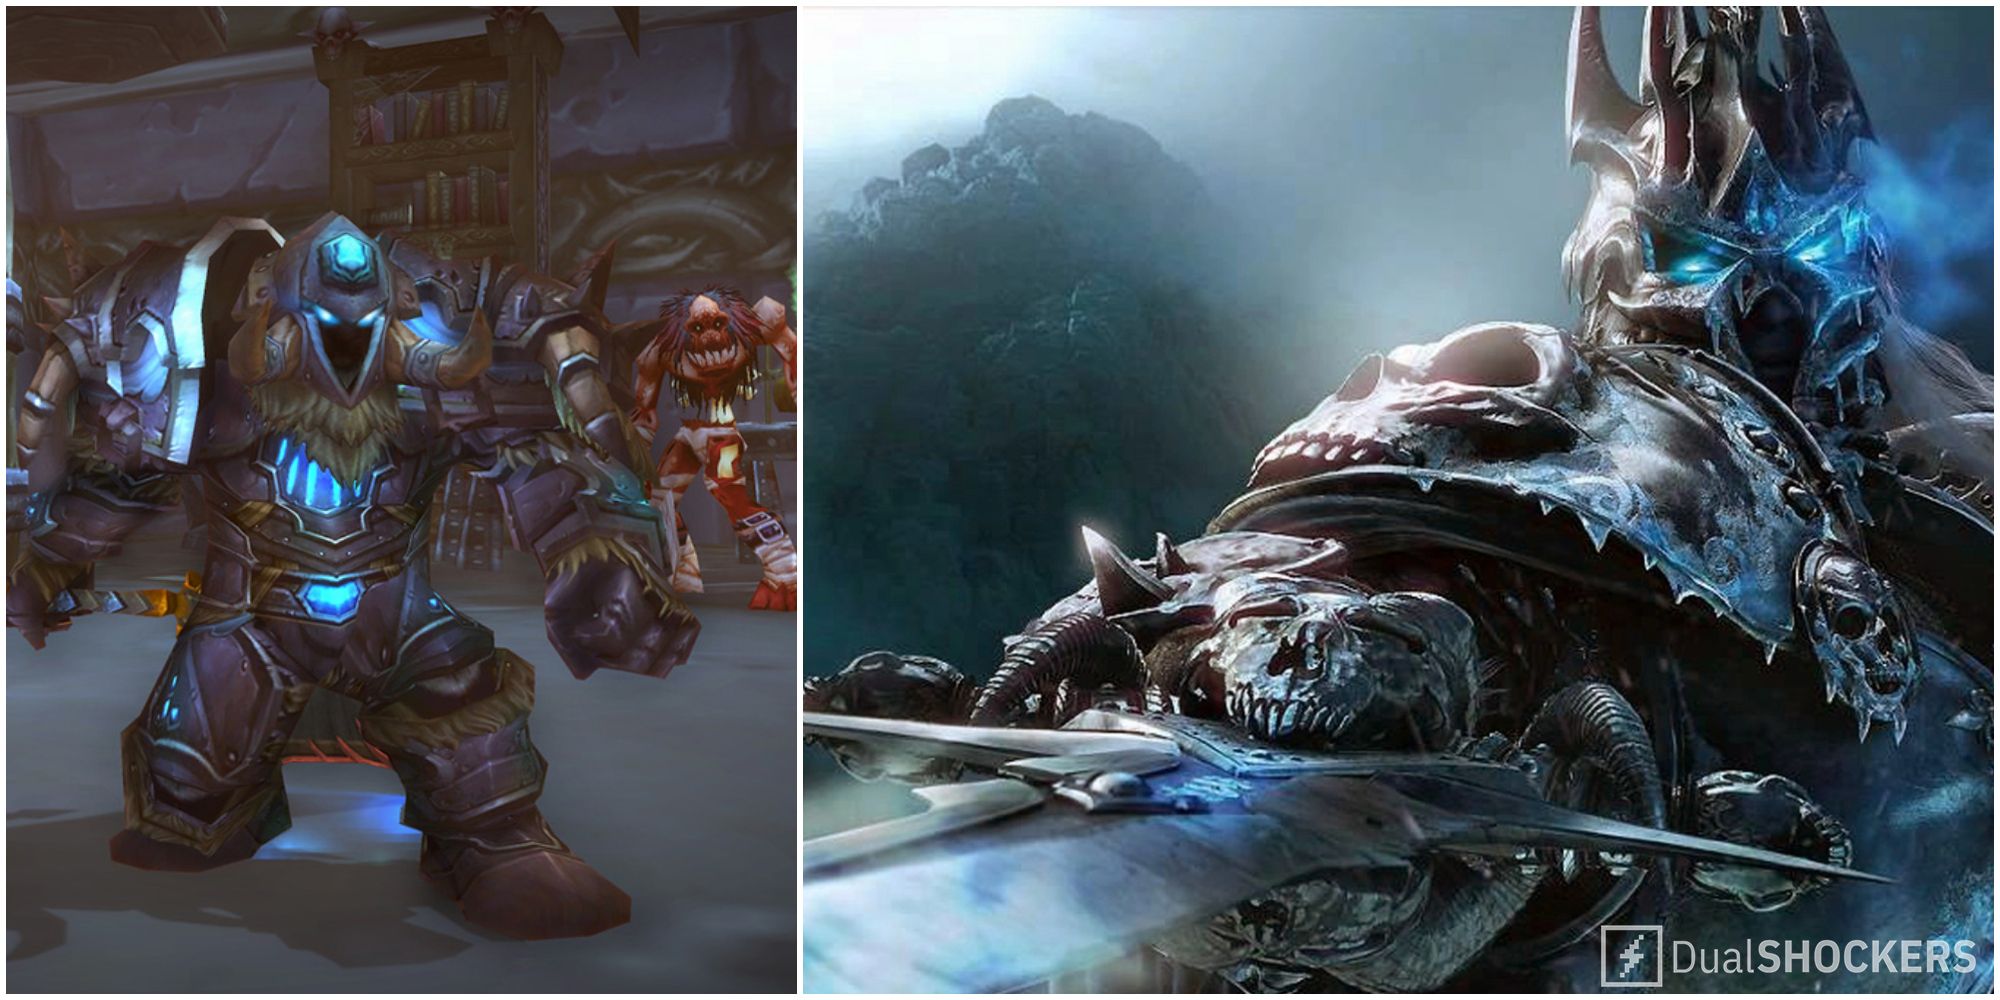 Side-by-side image of the Lich King and a Death Knight